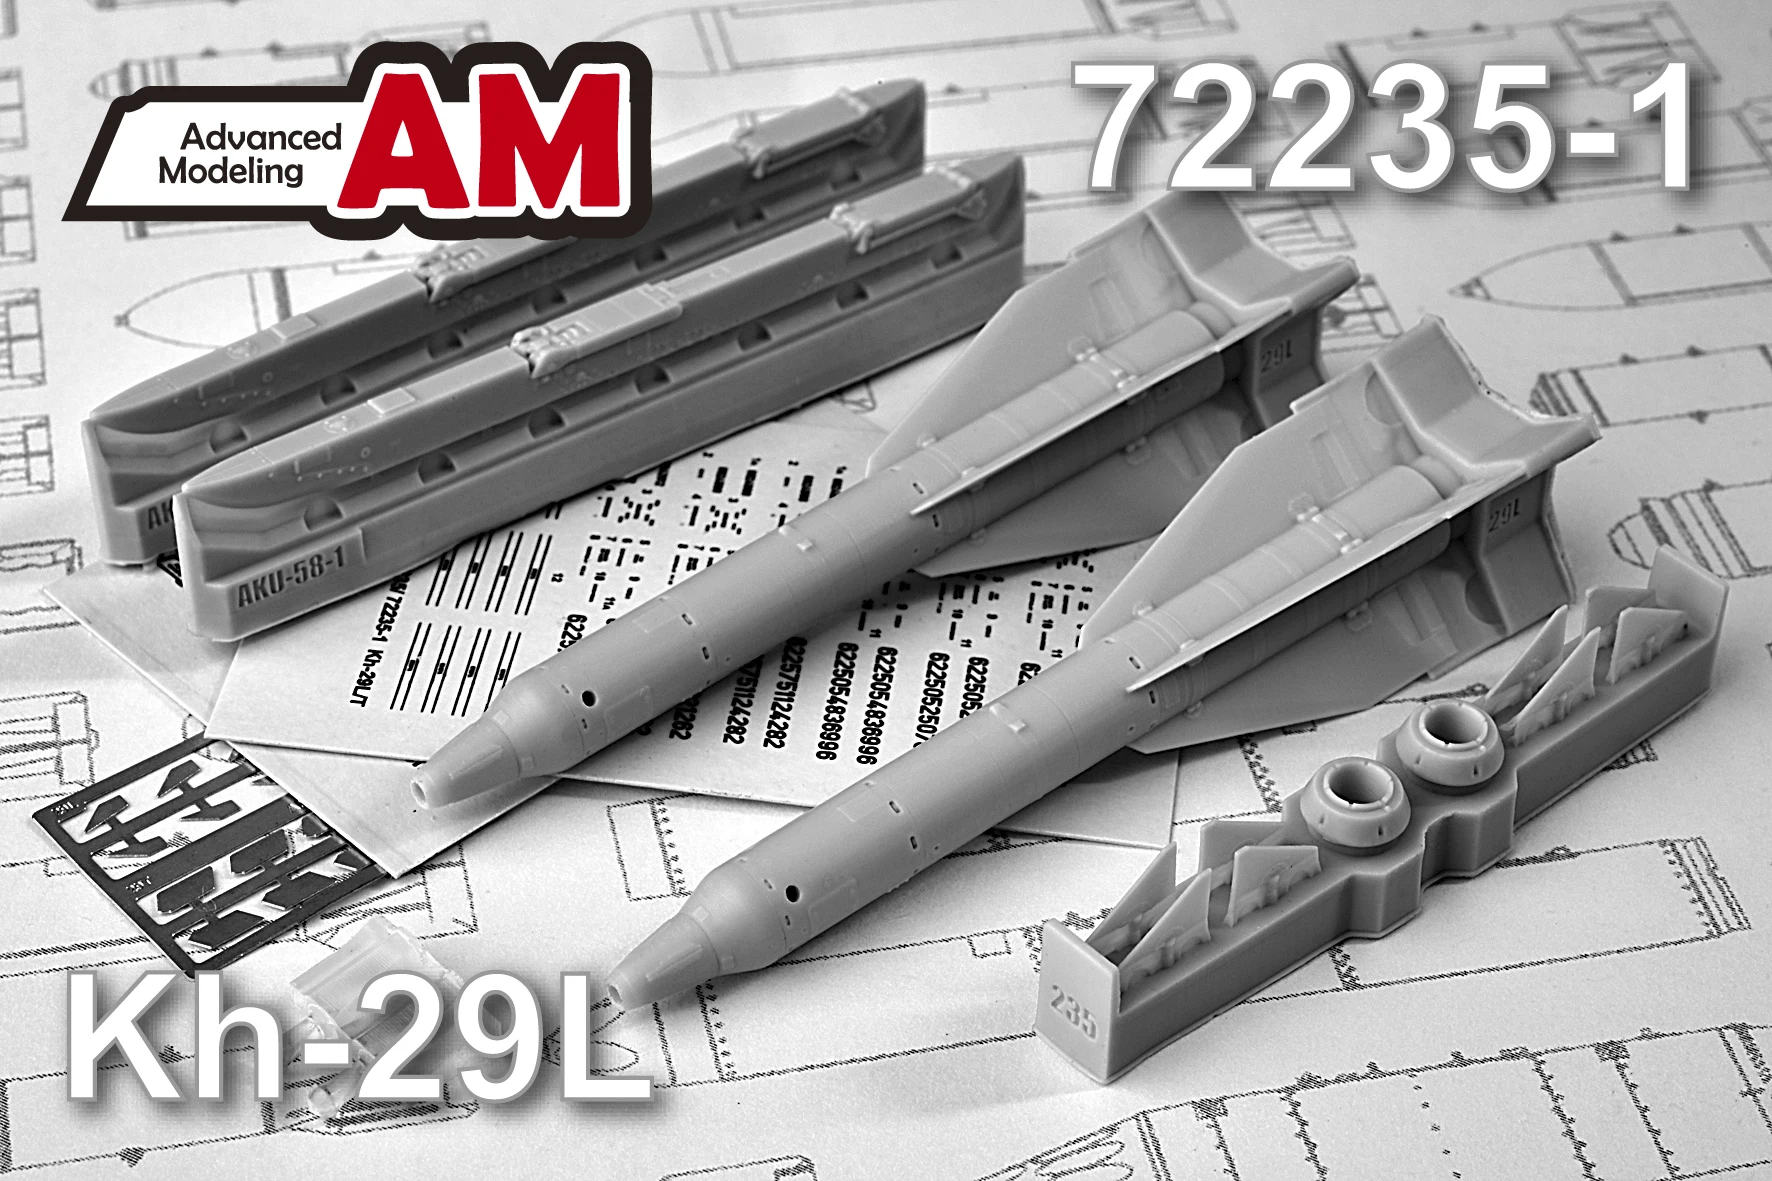 Additions (3D resin printing) 1/72 Aircraft guided missile Kh-29L with launcher AKU-58-1 (Advanced Modeling) 